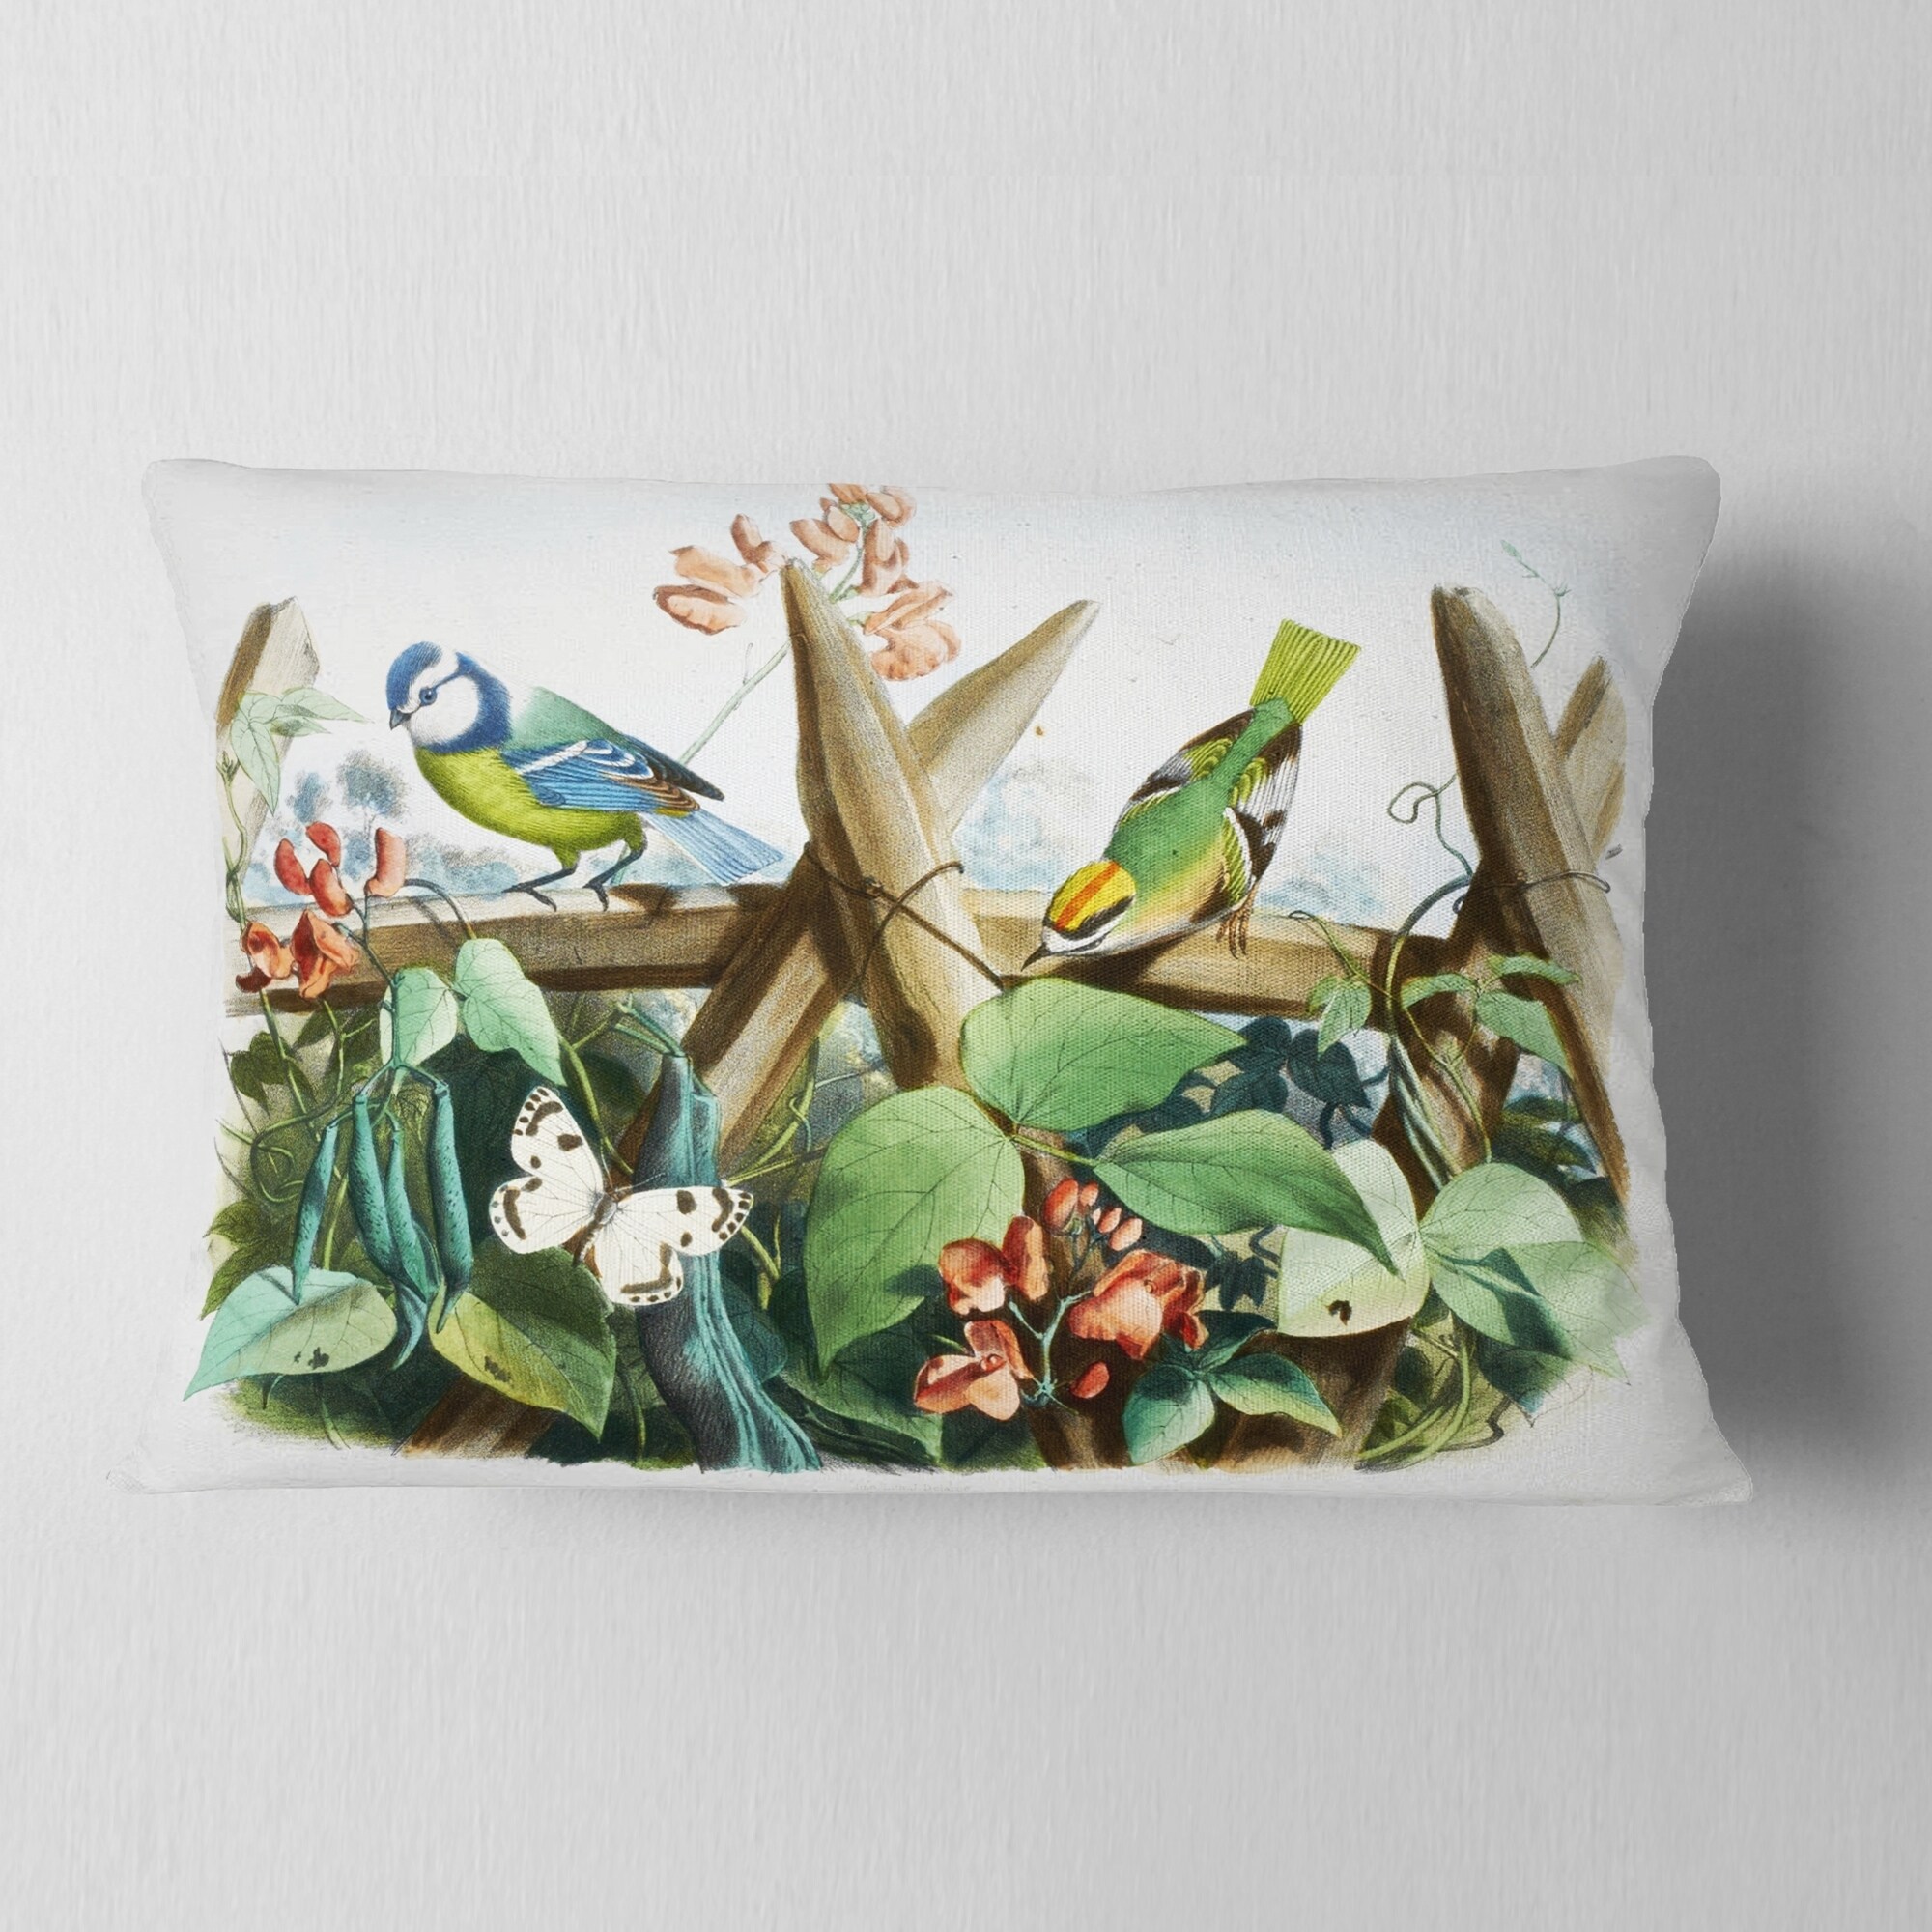 Designart 'Colorful Birds Sitting on Branches' Animal Throw Pillow